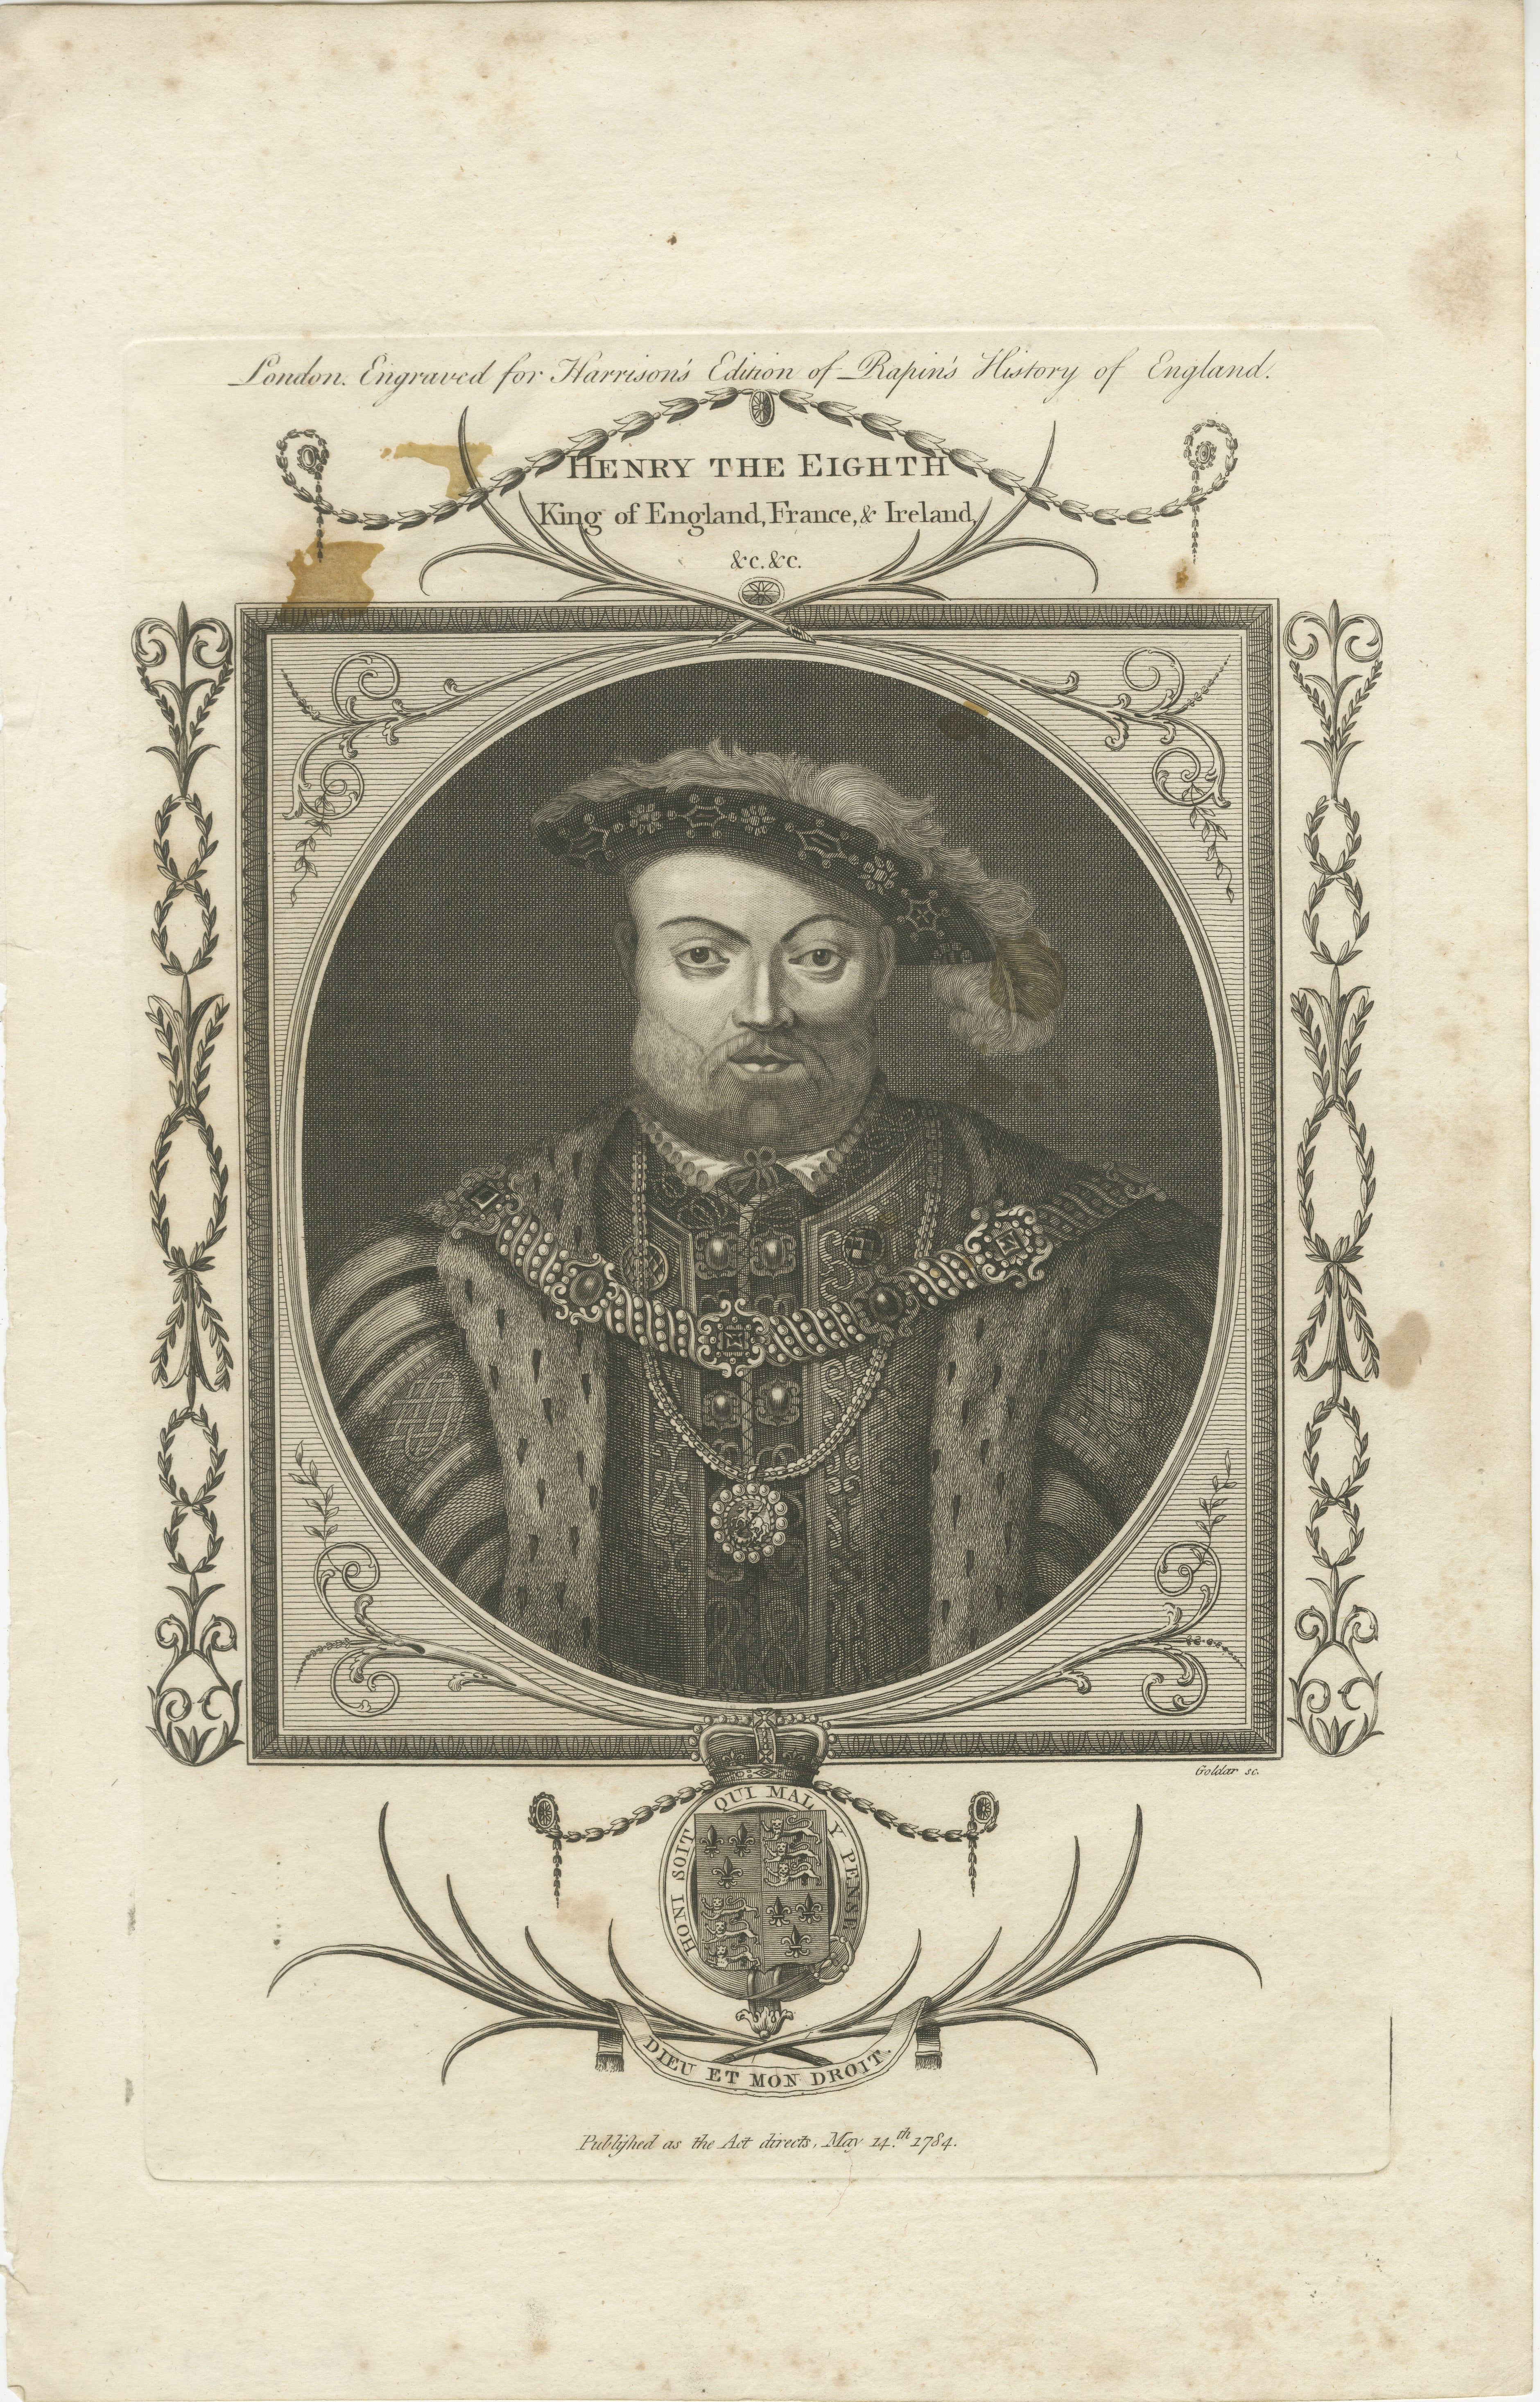 An engraved portrait of Henry VIII, King of England, famous for his role in the separation of the Church of England from the Roman Catholic Church. 

His reign saw the Dissolution of the Monasteries and significant changes to the English